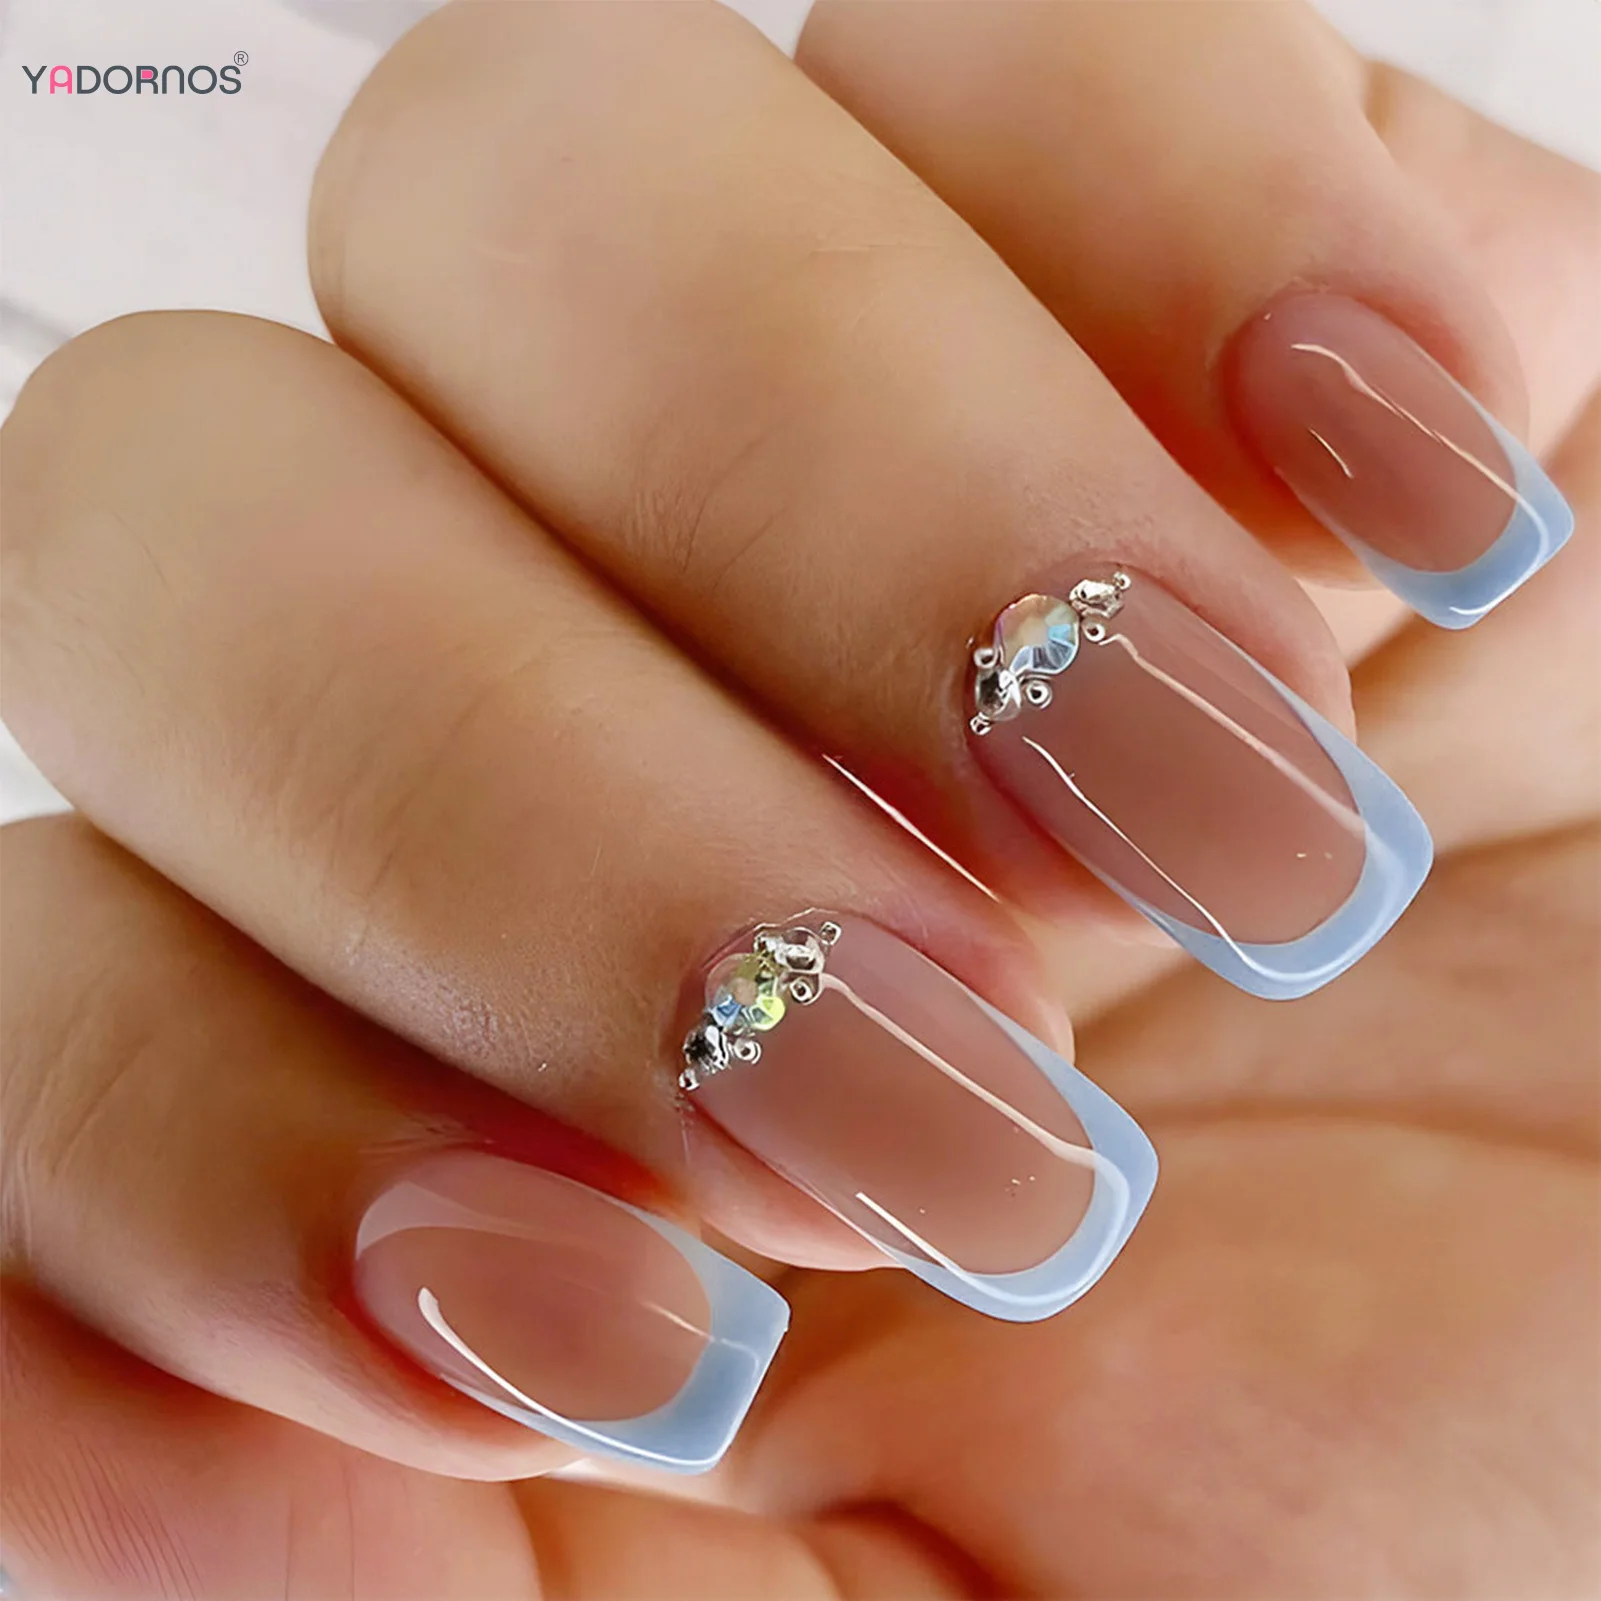 

Blue French Tips Press on Nails Diamond Designs for Women Girls Simple Nude Color Fake Nails Medium Length False Nails 24Pcs